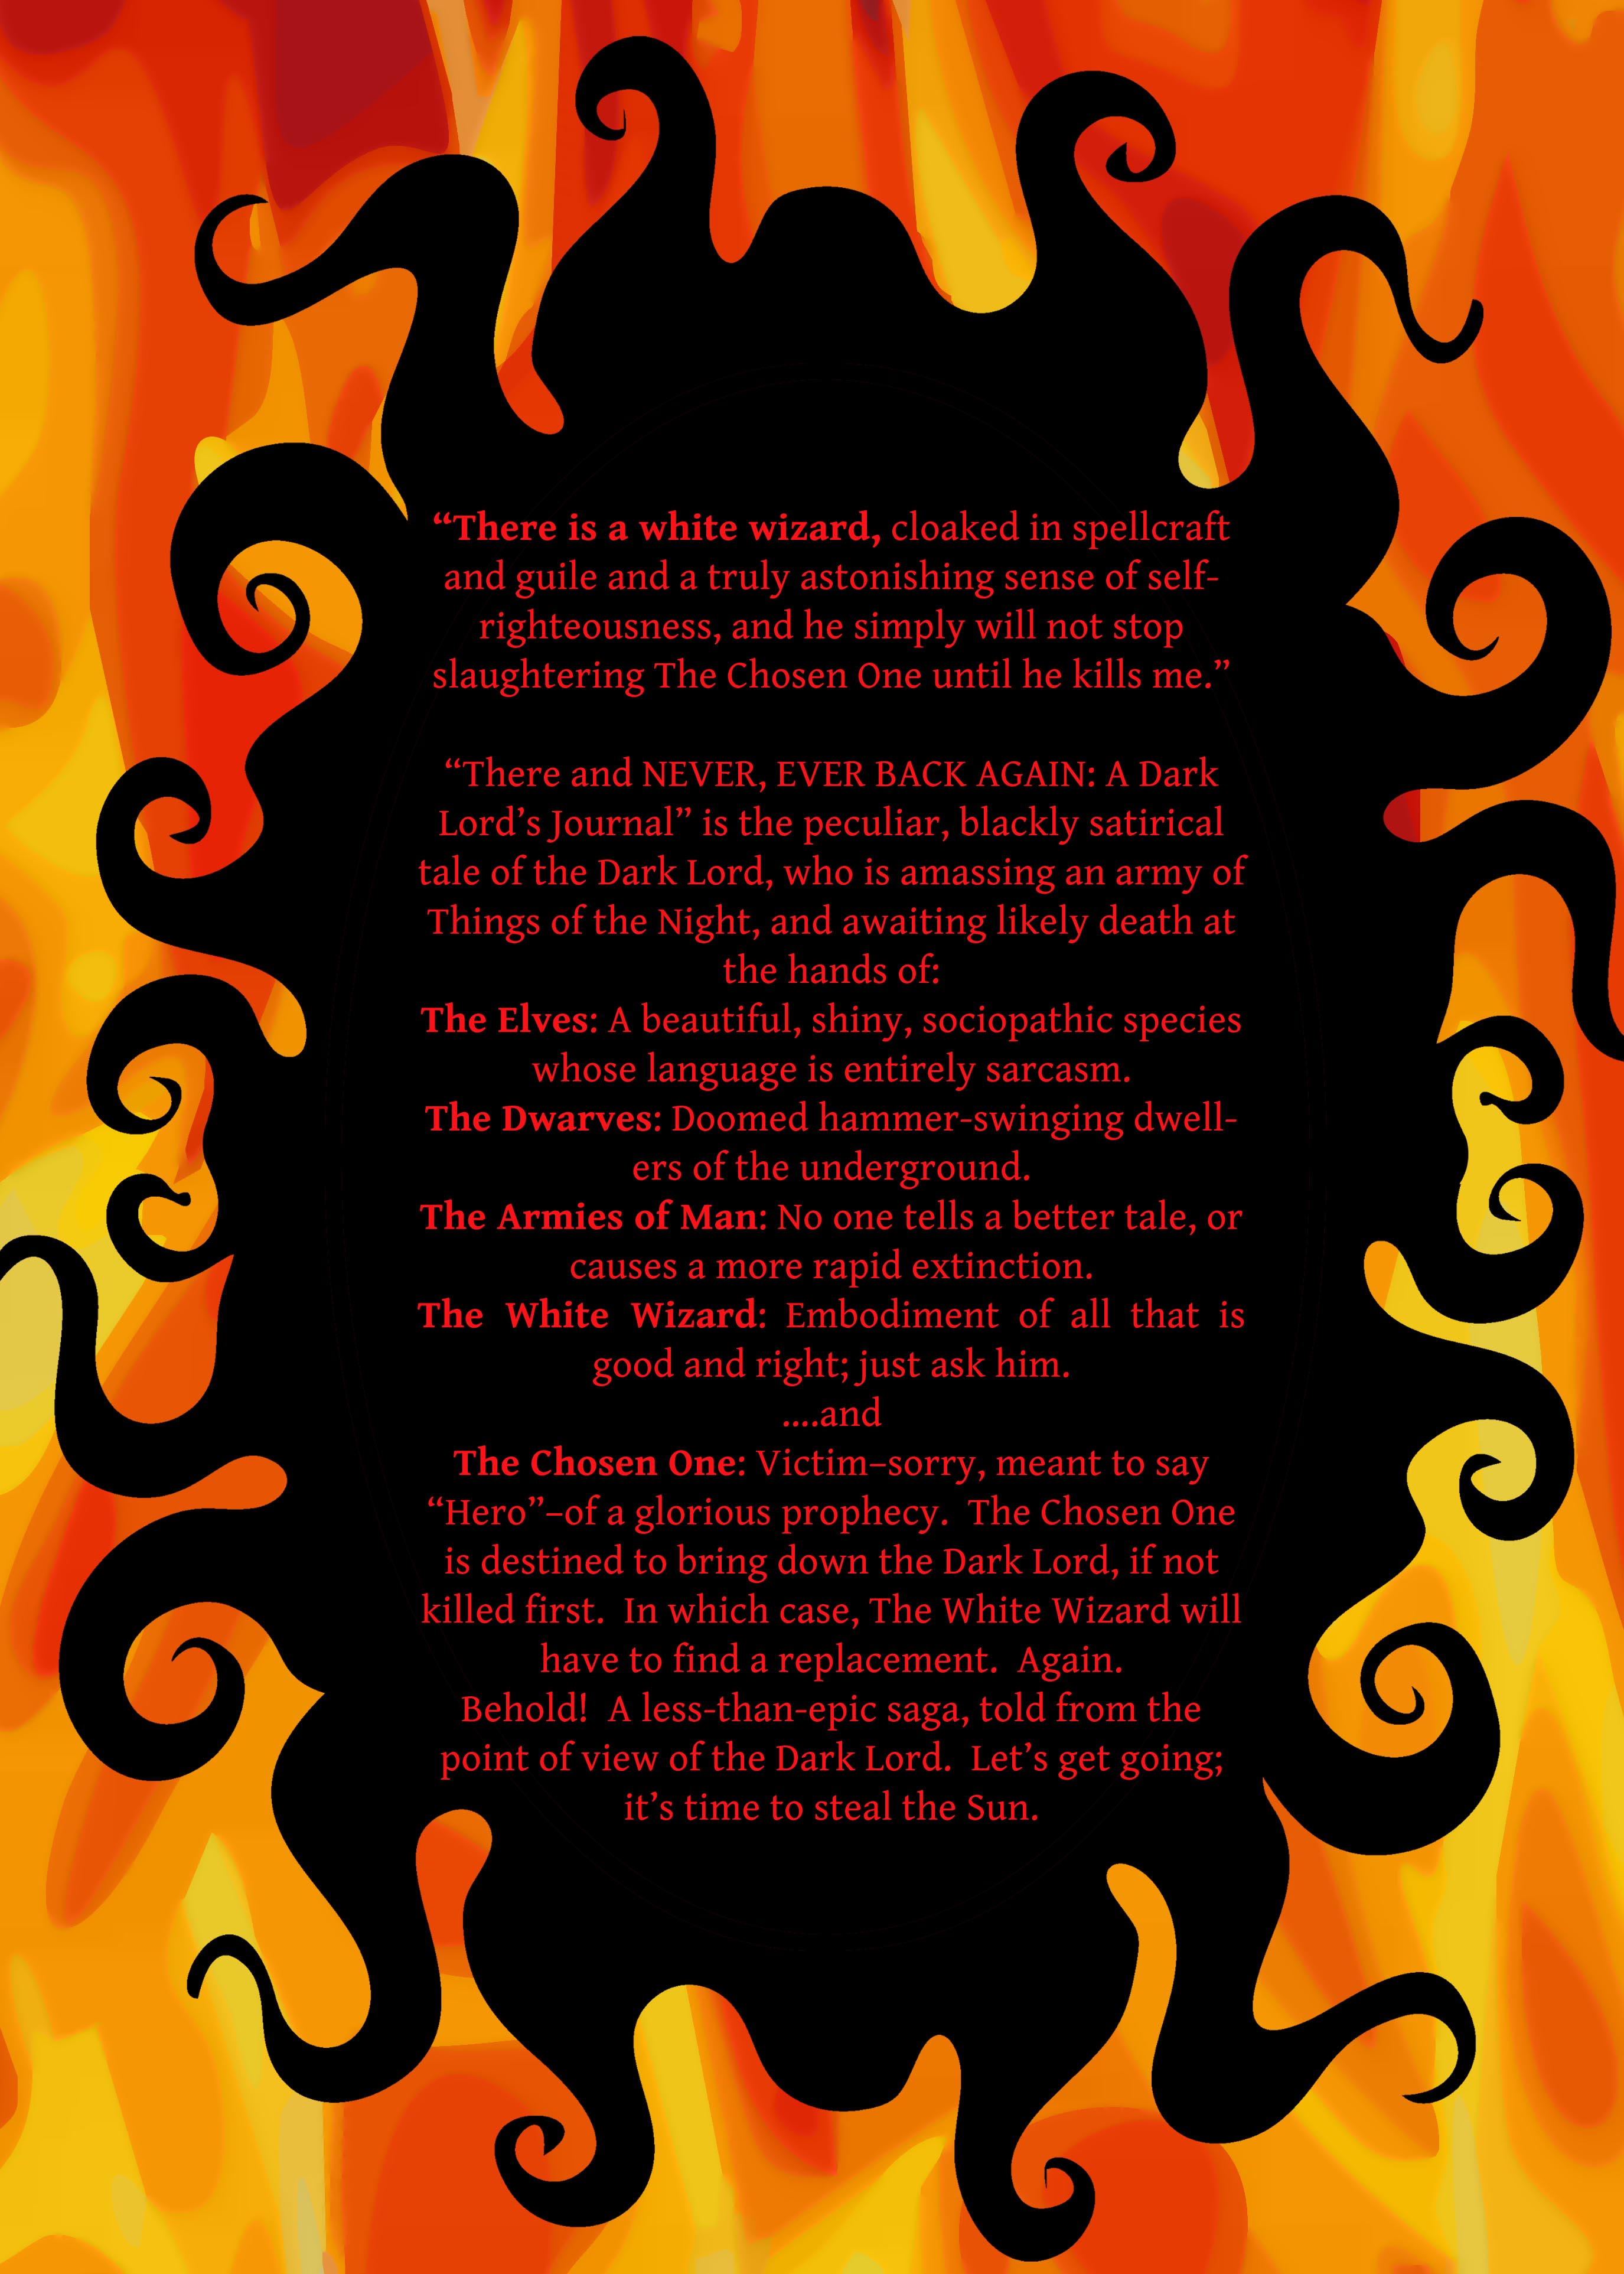 The back cover of "There and NEVER, EVER BACK AGAIN: Diary of a Dark Lord", Jeff Mach's savagely satirical epic fantasy novel